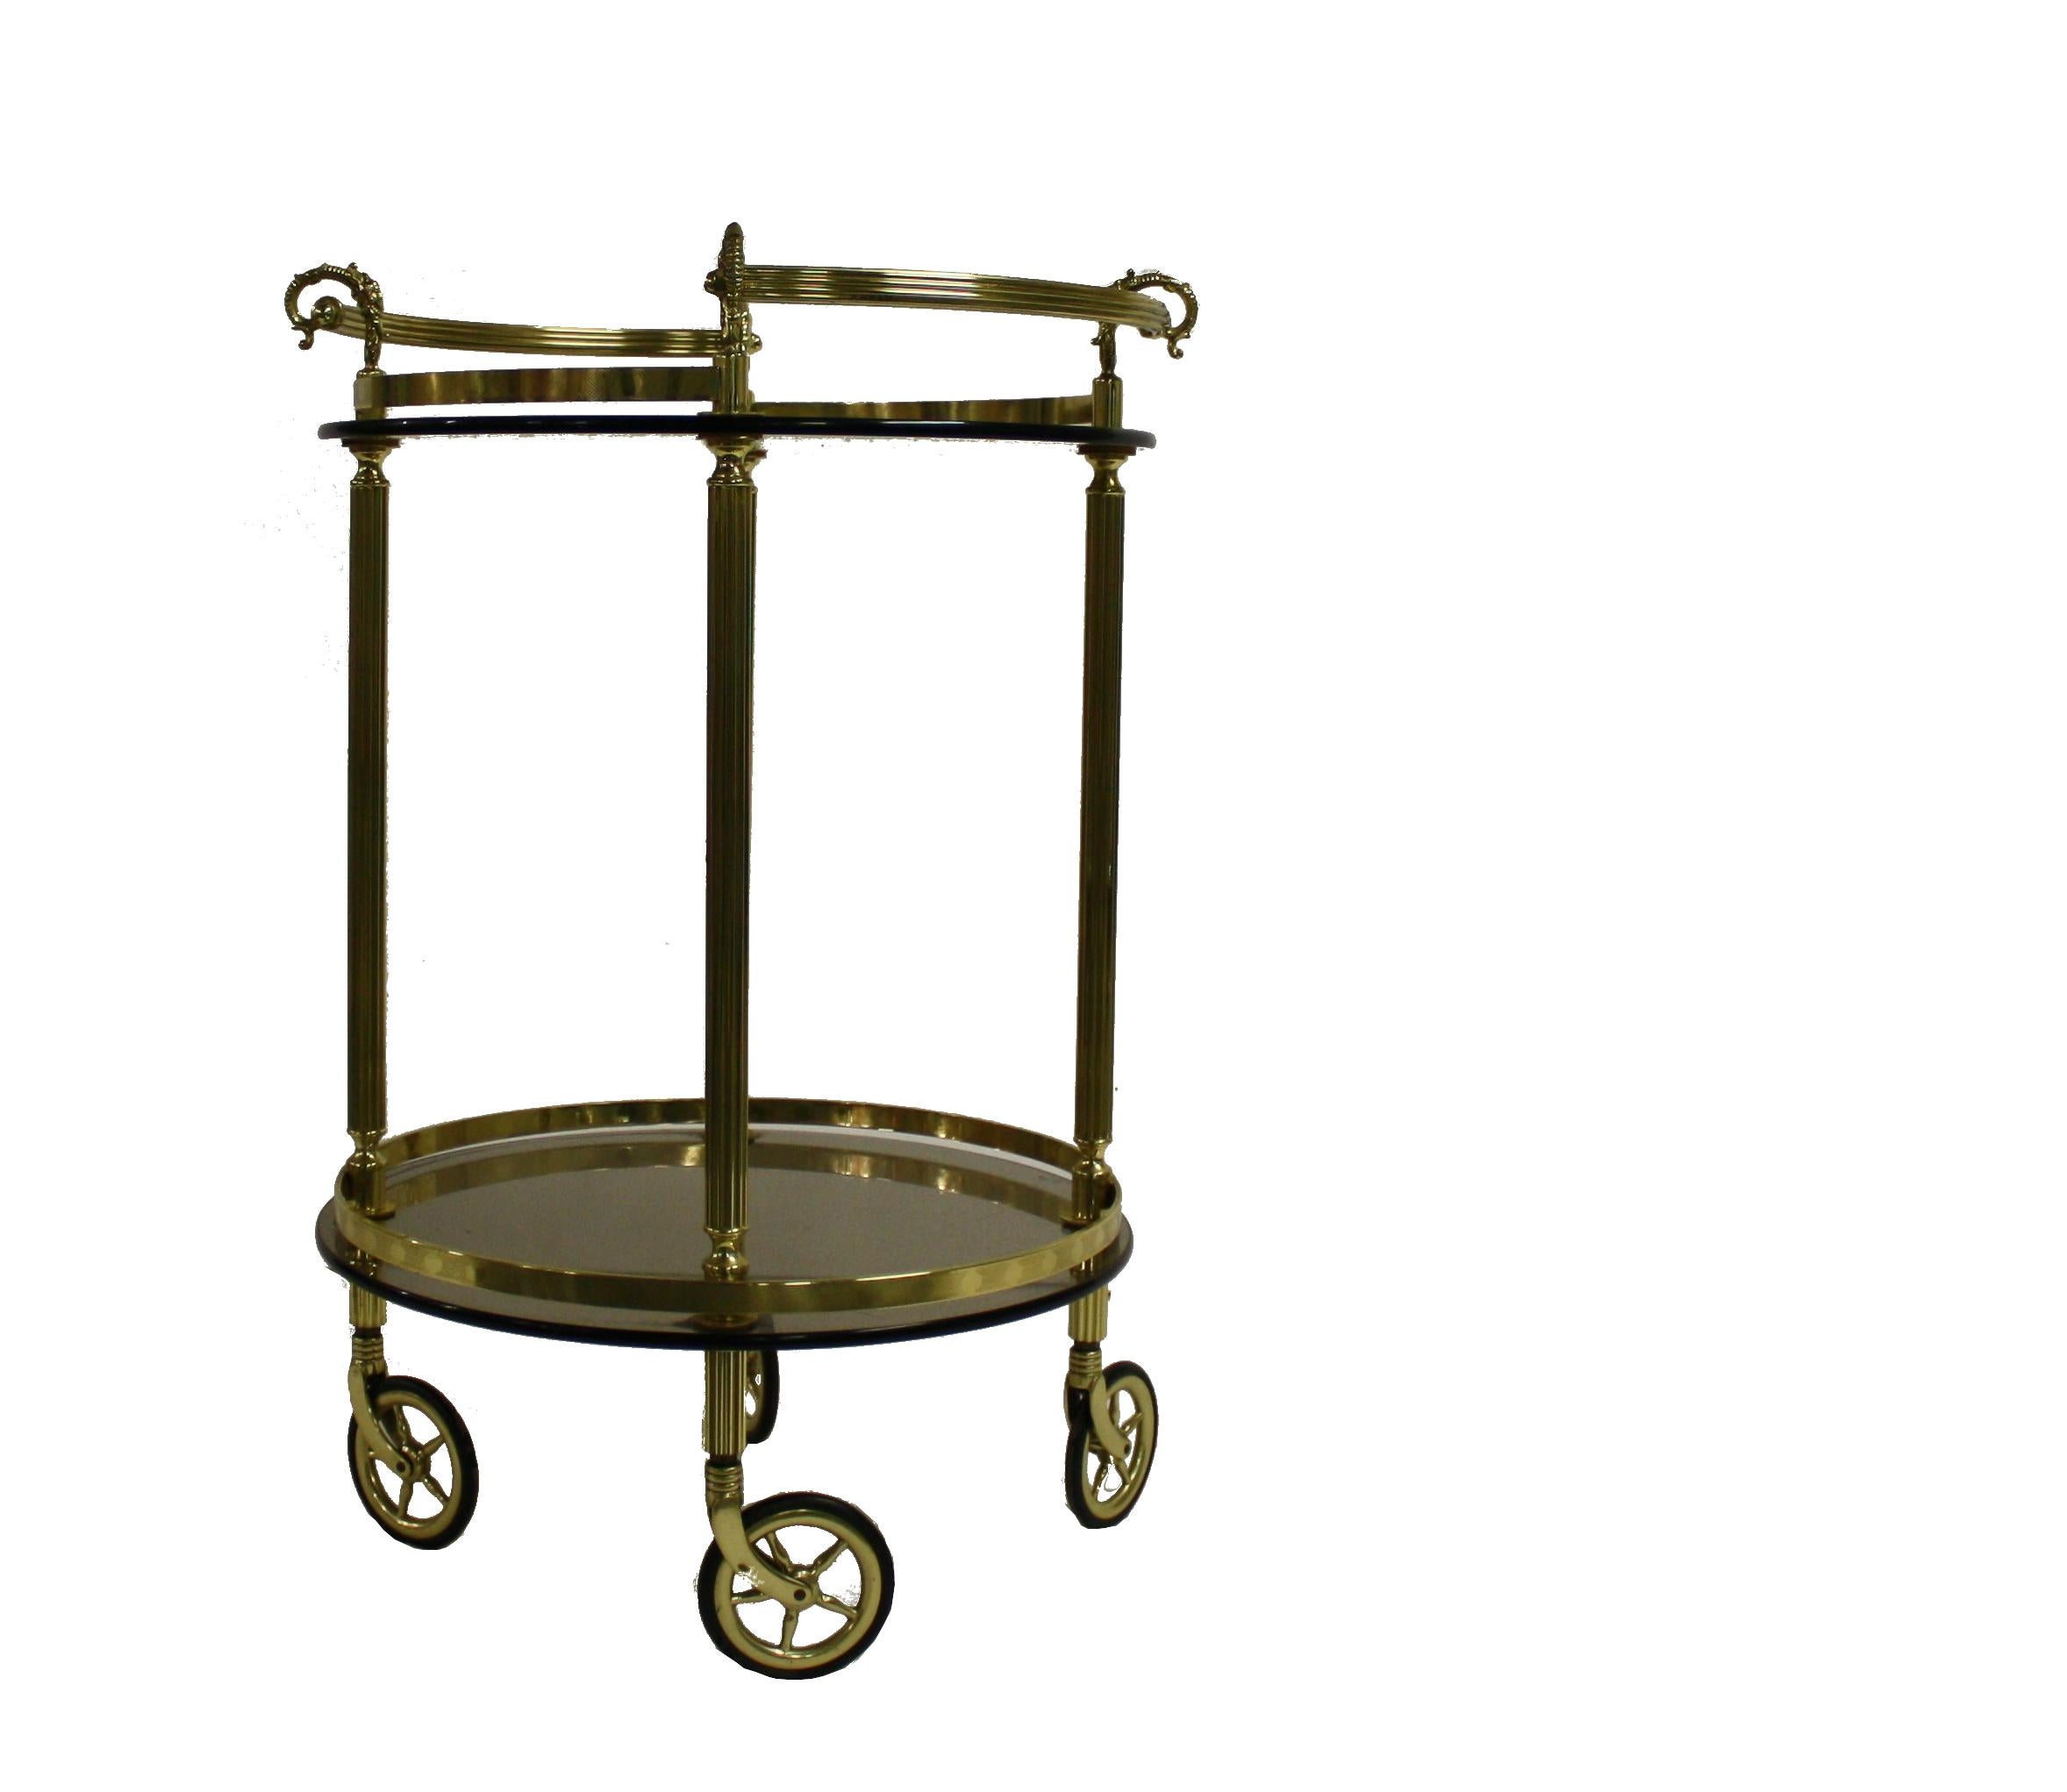 Neoclassical brass serving trolley with two round smoked glass shelves.

Finely sculpted brass handles.

One of the wheels has a small chip, but it remains fully functional and serves a great decorative purpose.

France,